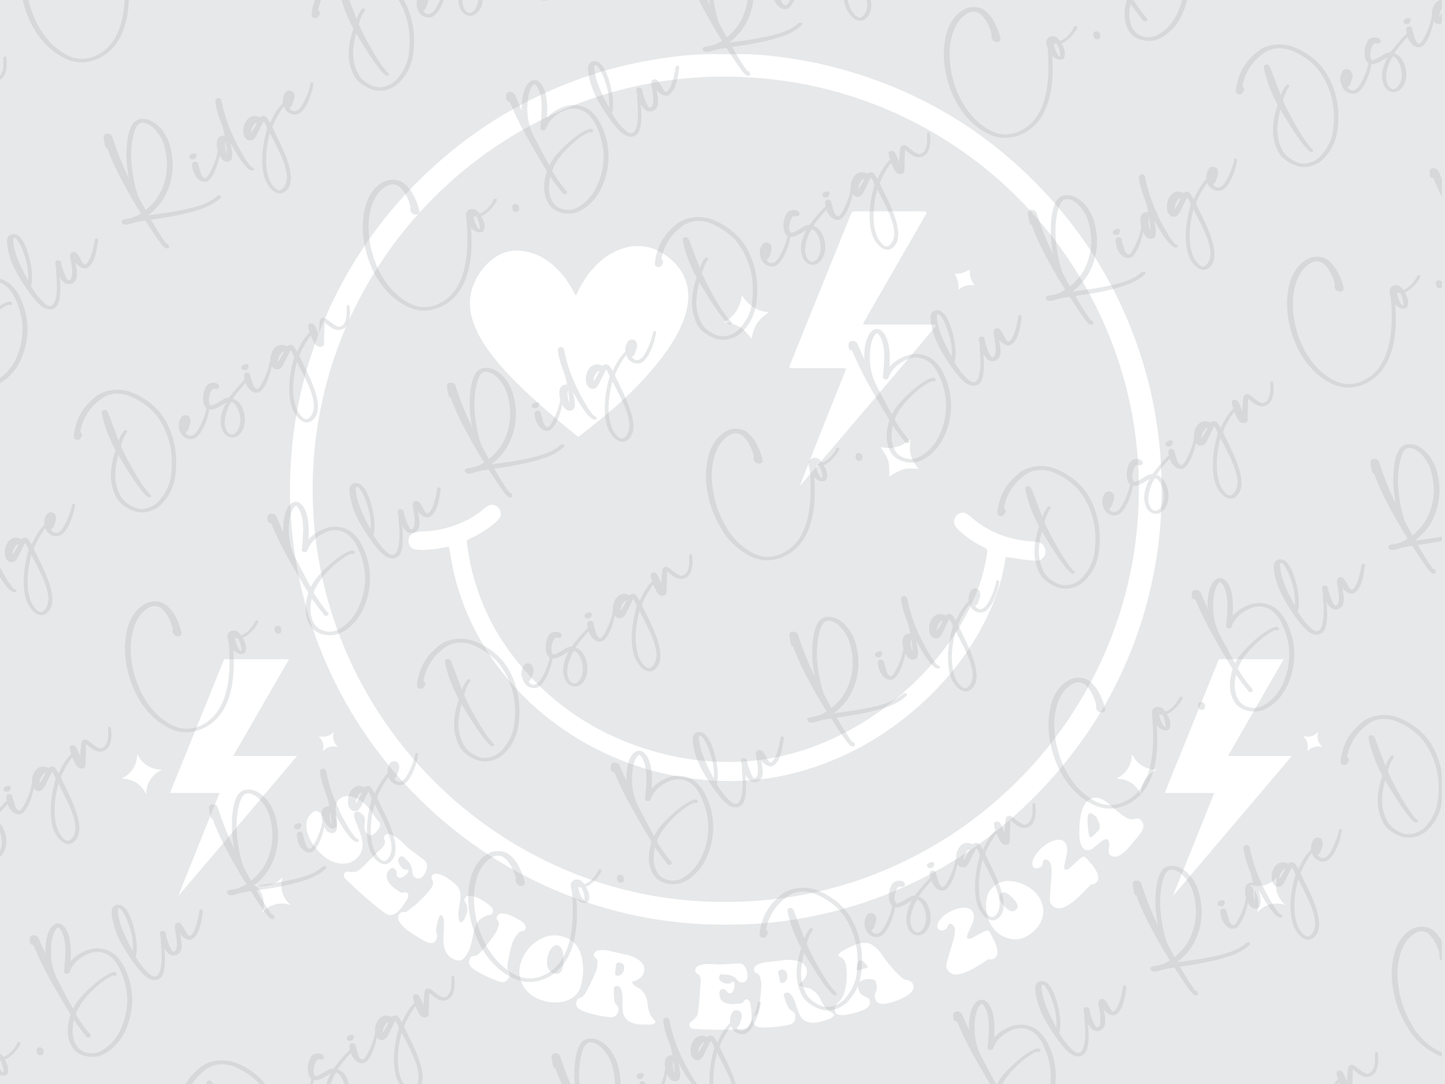 Senior Era 2024 Smiley Face With Trendy Heart and Lightning Bolts Design Direct To Film (DTF) Transfer